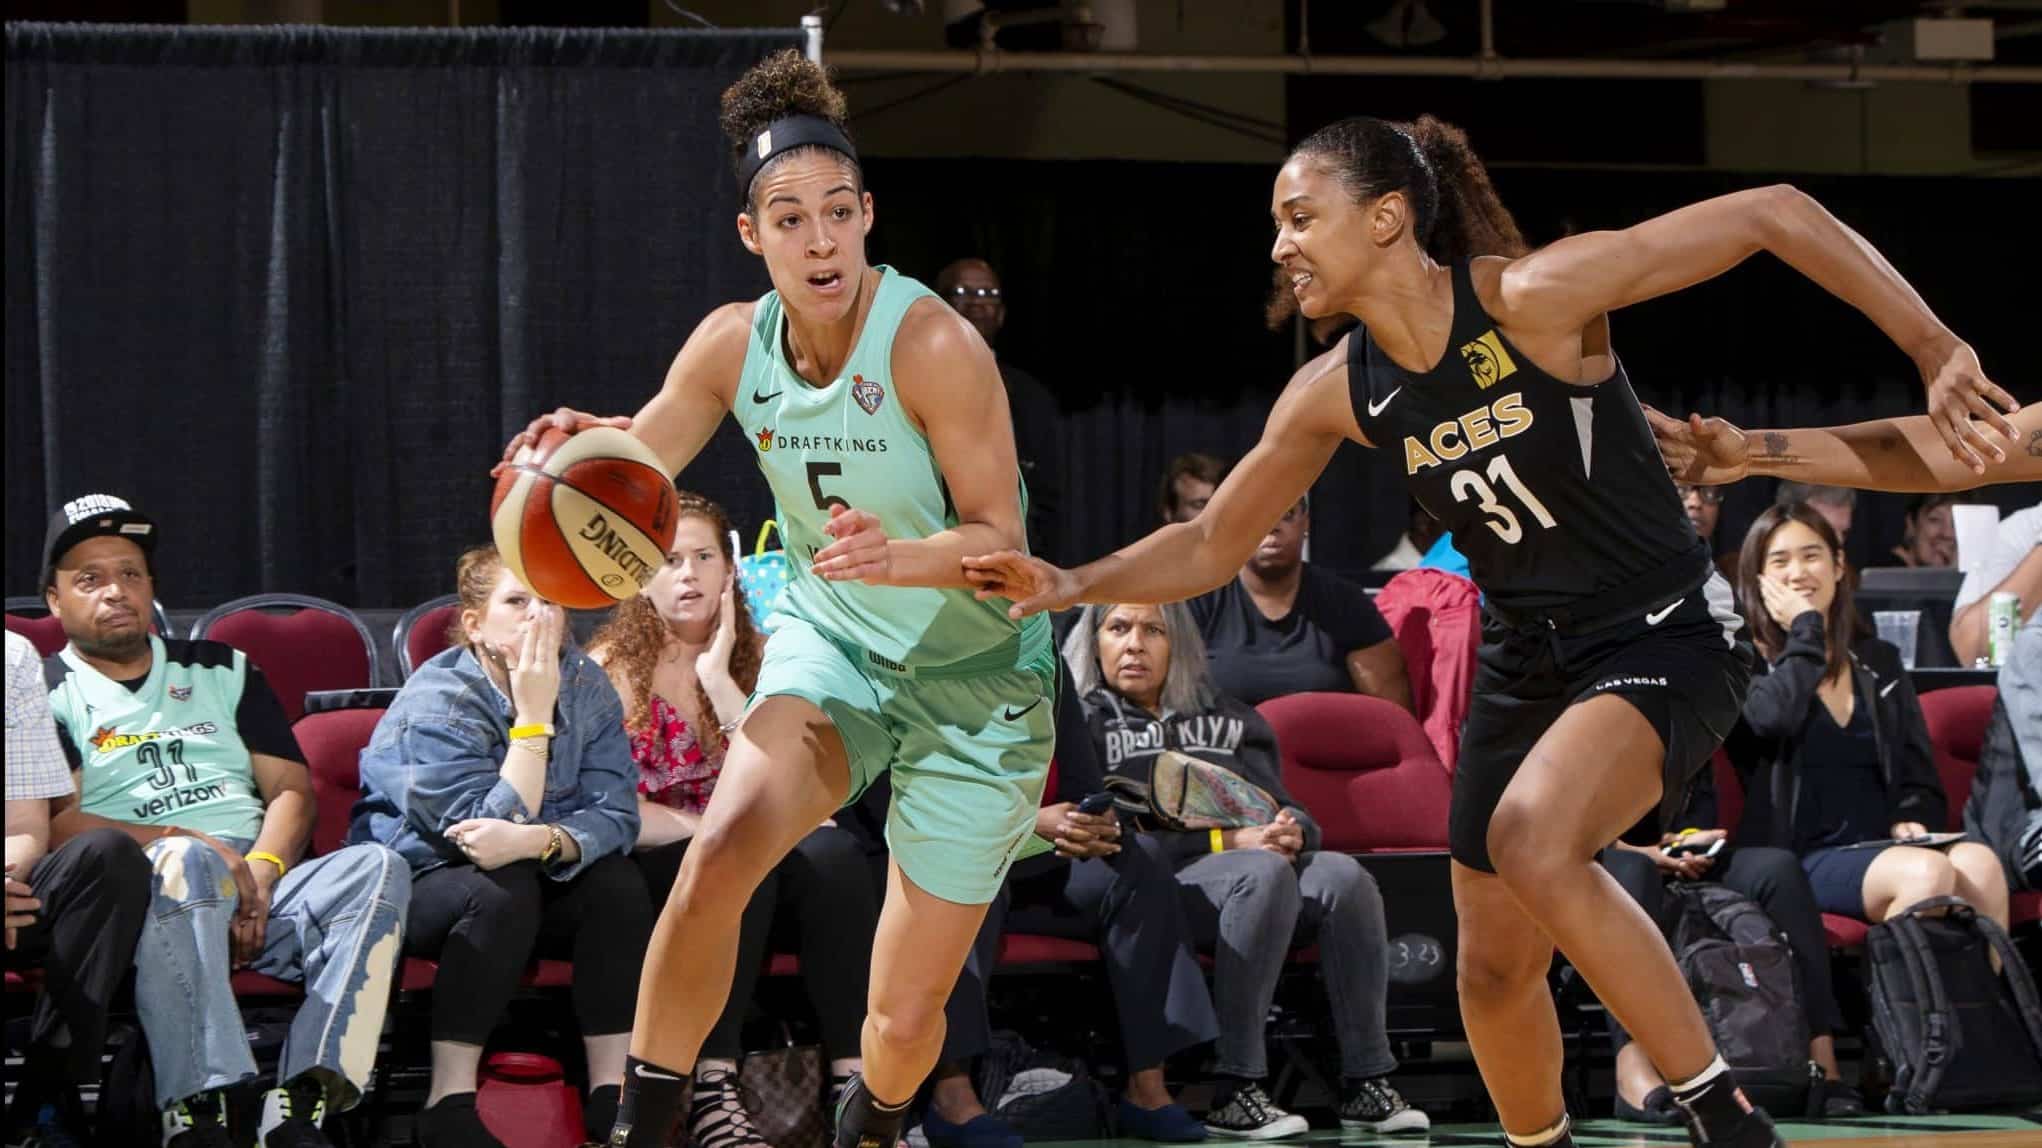 WHITE PLAINS, NY - JUNE 13: Kia Nurse #5 of the New York Liberty handles the ball against the Las Vegas Aces on June 13, 2018 at Westchester County Center in White Plains, New York. NOTE TO USER: User expressly acknowledges and agrees that, by downloading and or using this photograph, User is consenting to the terms and conditions of the Getty Images License Agreement. Mandatory Copyright Notice: Copyright 2018 NBAE